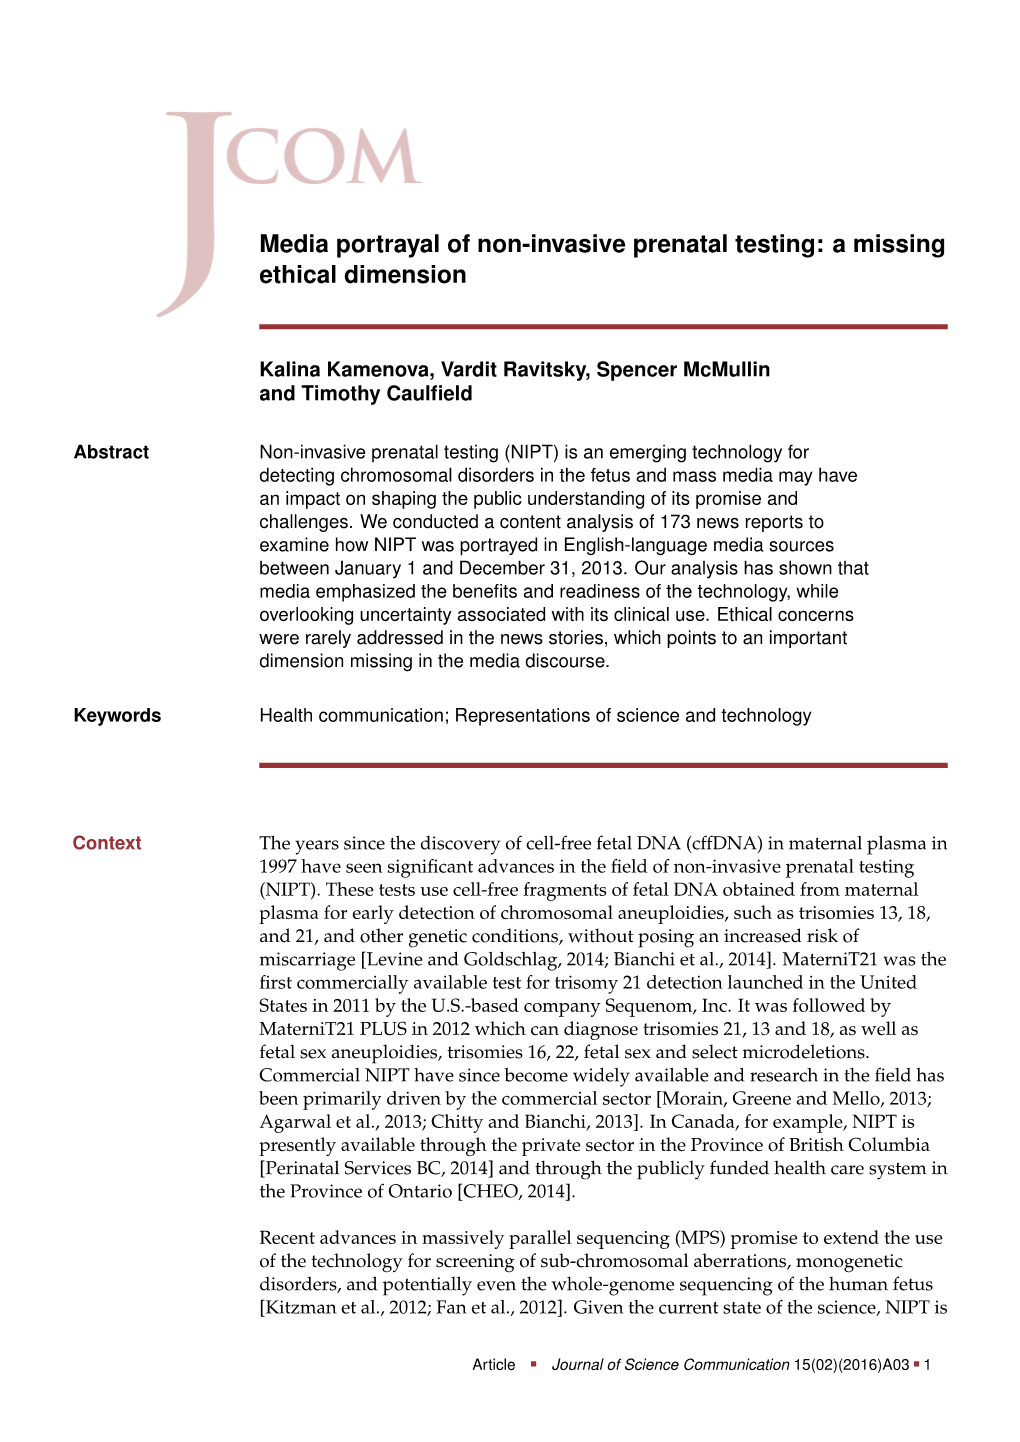 Media Portrayal of Non-Invasive Prenatal Testing: a Missing Ethical Dimension